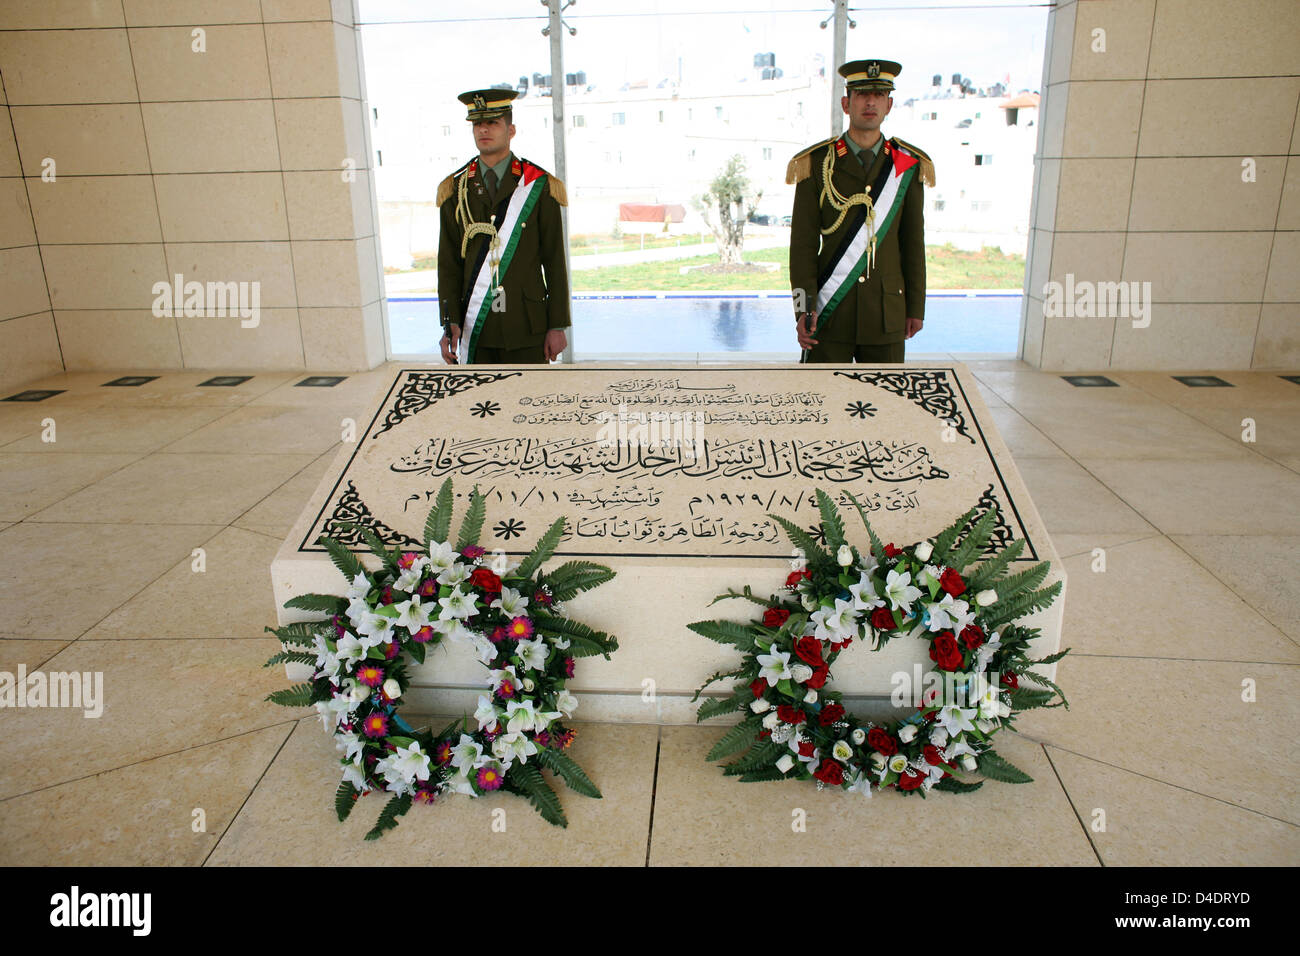 Interior view on the mausoleum of Yasser Arafat with the guard of honour in Ramallah, Palestinian Autonomous Territories, 27 February 2008. Yasser Arafat, also referred to as 'Abu Ammar', had served as Chairman of the Palestine Liberation Organisation (PLO) for decades and as President of the Palestinian National Authority (PA) before he died aged 75 on 11 November 2004 in Paris, F Stock Photo